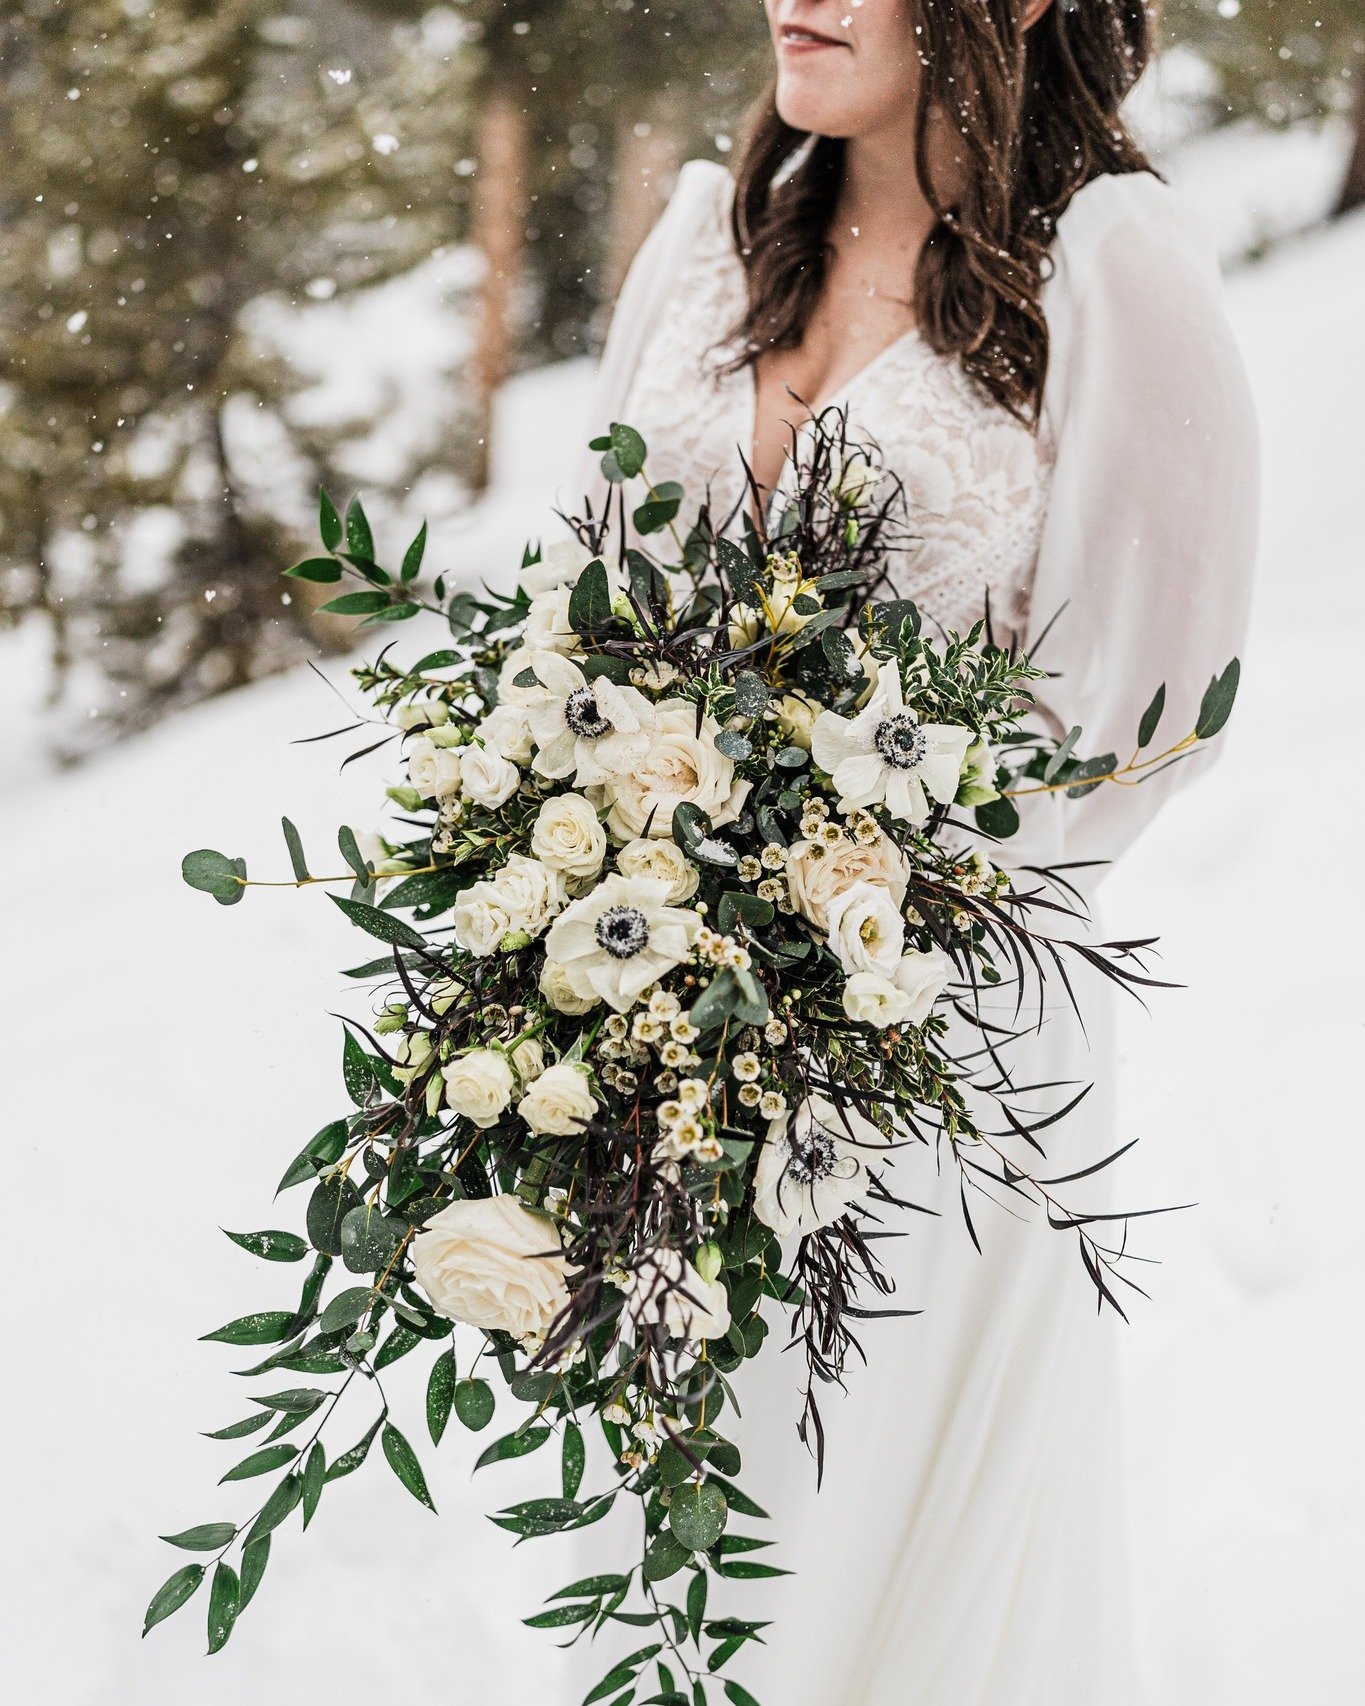 It's nature's own masterpiece, blending the delicate beauty of spring with the serene elegance of winter. At least that is what we like to think.

📸 @wethelightphoto
.
.
.
.
.
.
.
#summitcounty
#summitcountywedding
#weddingsflowers
#exploresummit
#b